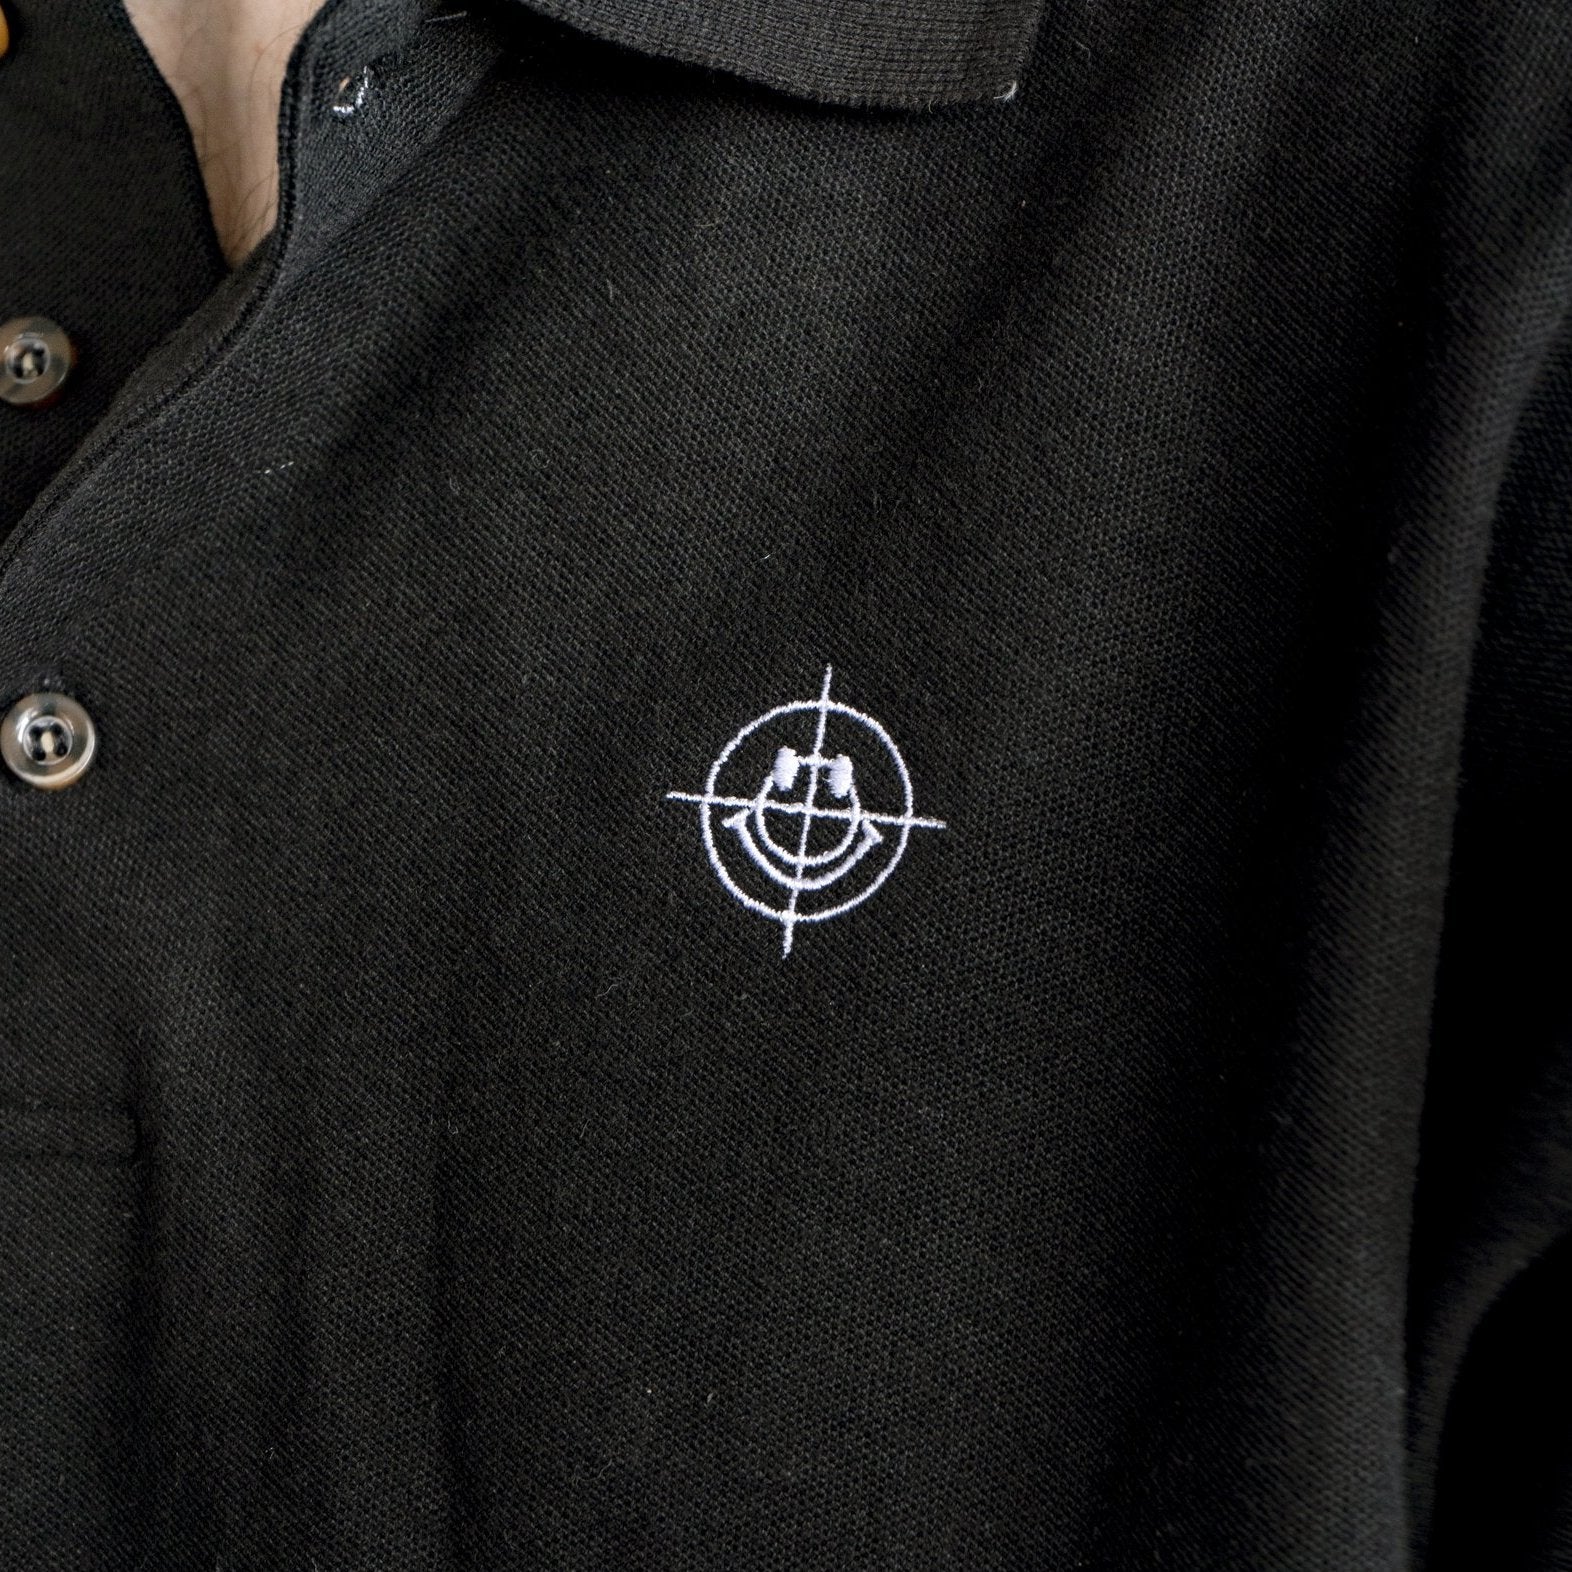 Detail of the embroidery on the black "Target" polo.